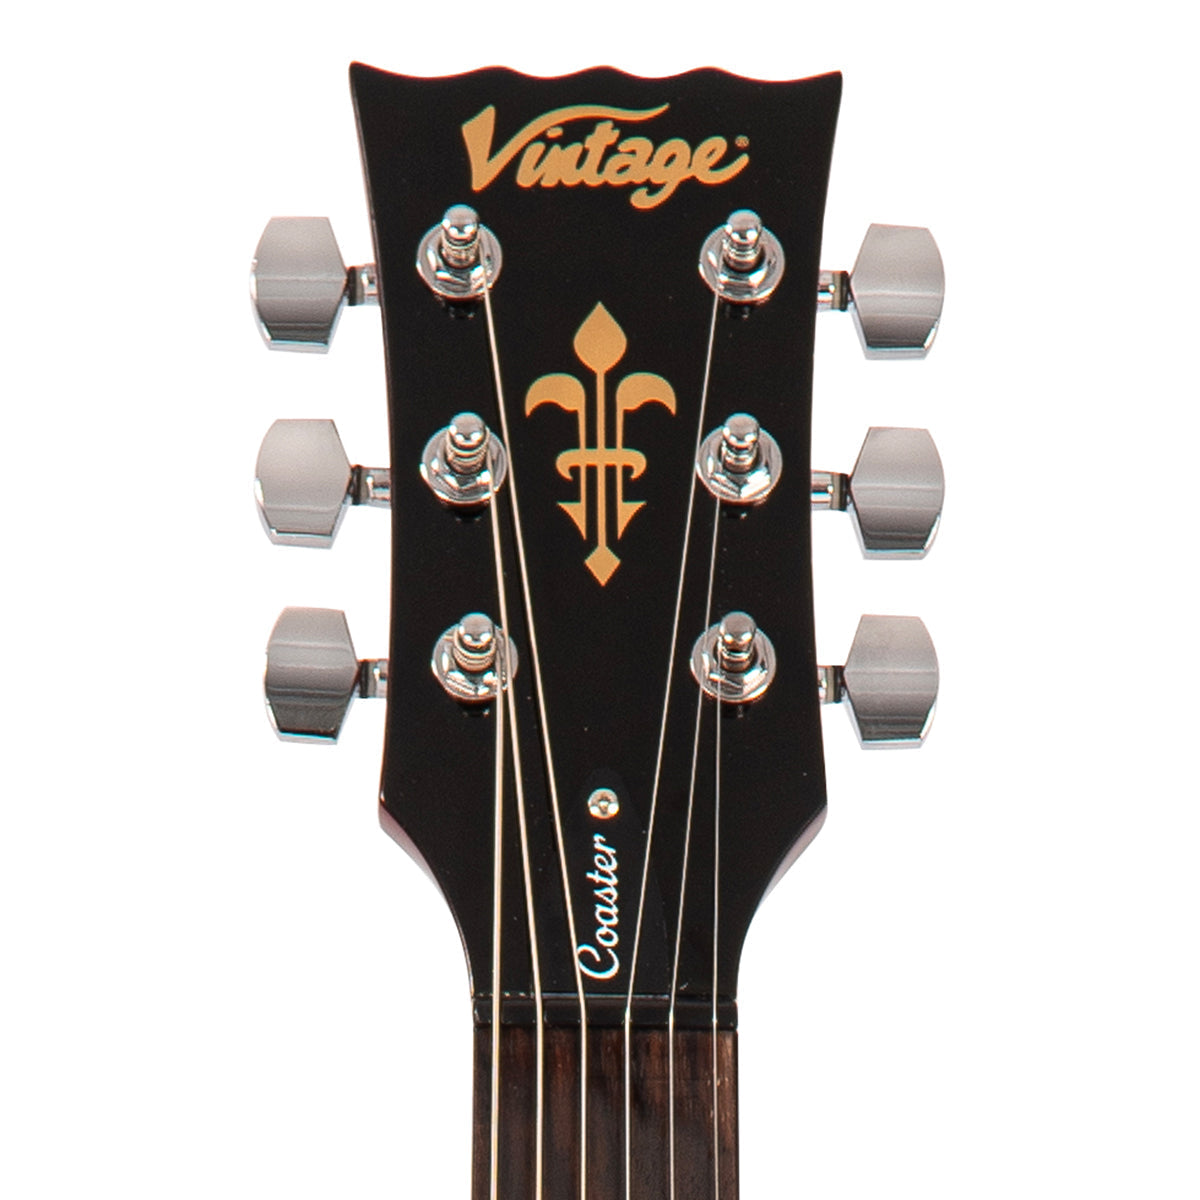 Vintage V69 Coaster Series Electric Guitar Pack ~ Cherry Red, Electric Guitar for sale at Richards Guitars.